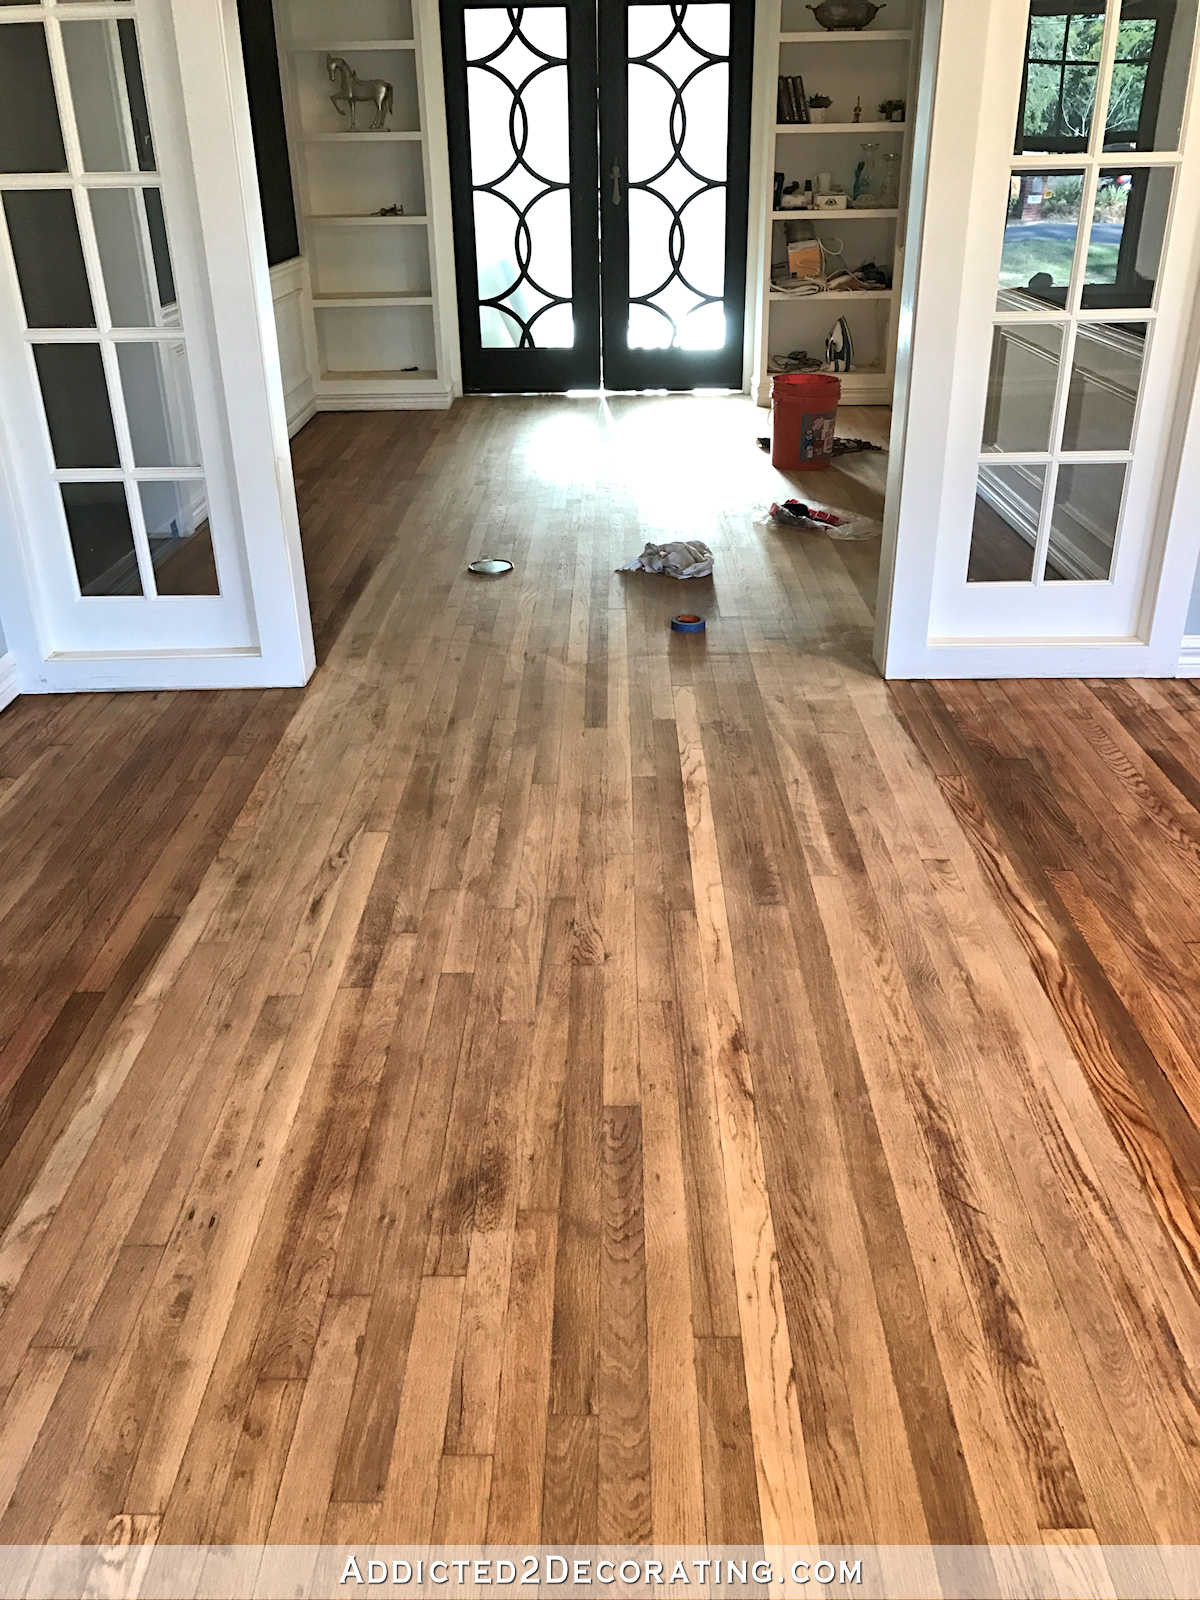 14 Stunning How Hard is It to Refinish Hardwood Floors 2024 free download how hard is it to refinish hardwood floors of adventures in staining my red oak hardwood floors products process inside staining red oak hardwood floors 5 music room wood conditioner